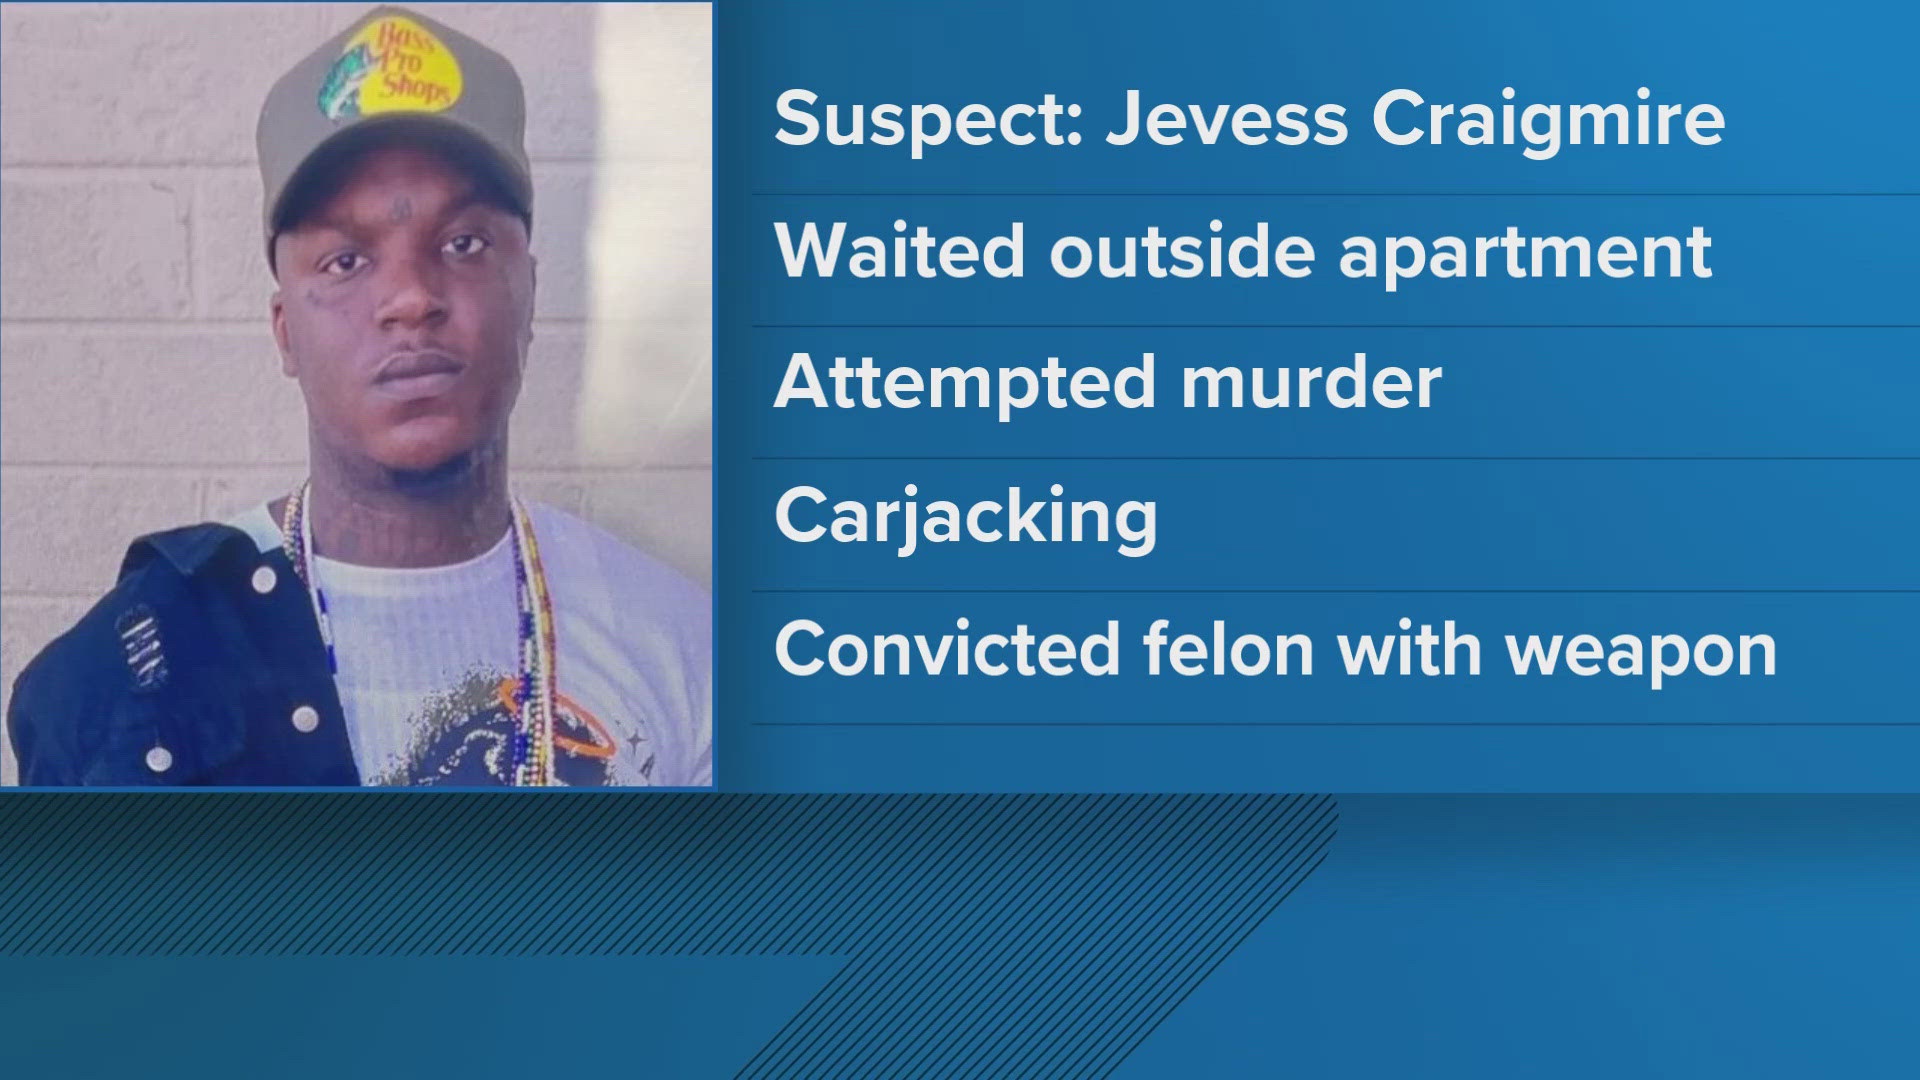 The Knoxville Police Department said Jevess Craigmire turned himself in at the Public Safety Complex Monday morning.